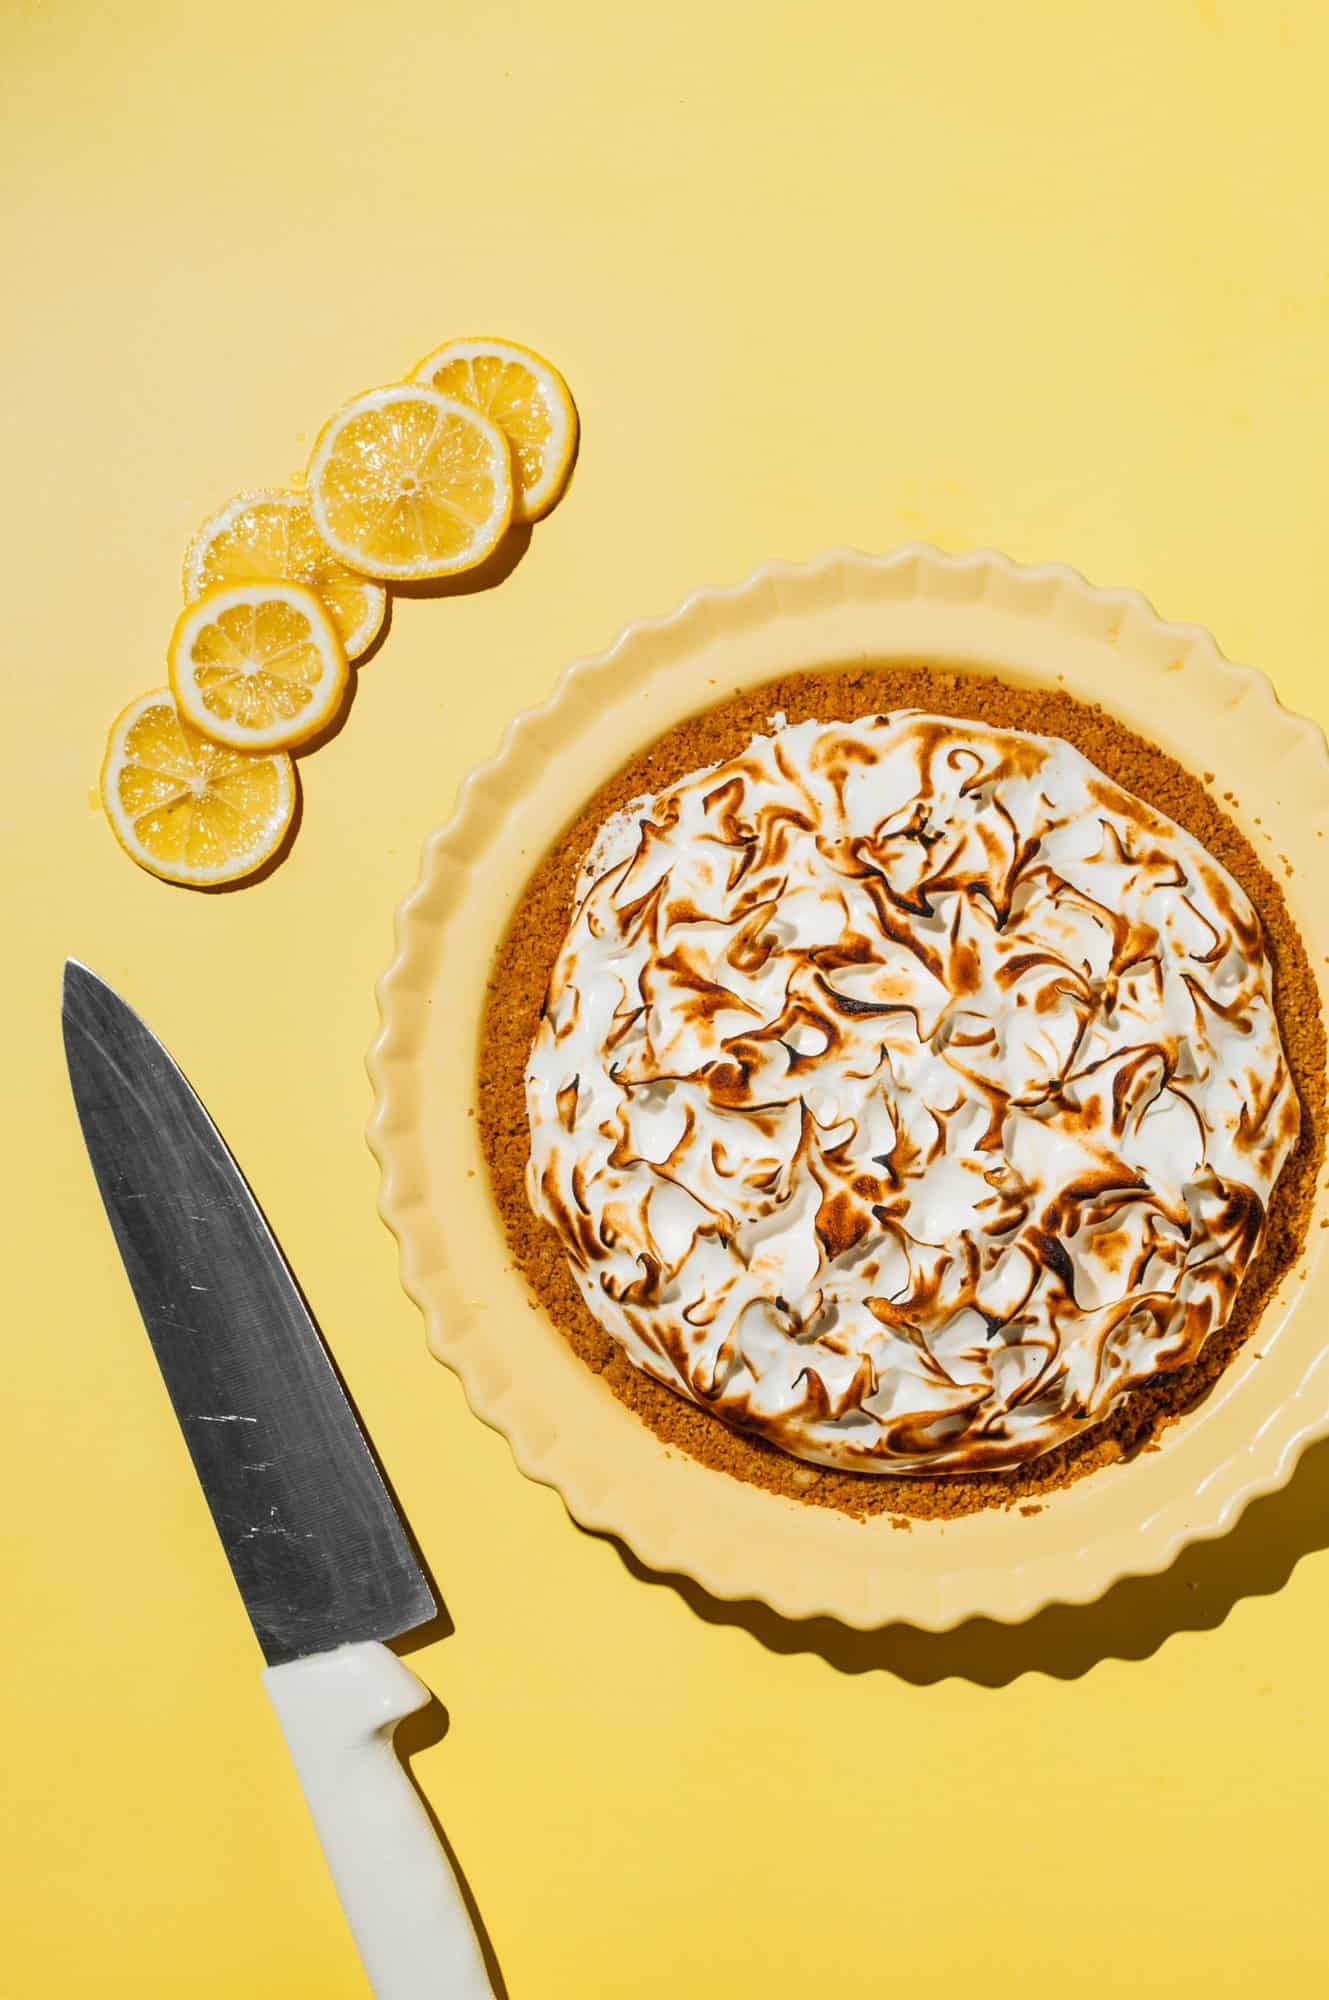 lemon meringue pie in yellow pie plate with lemon slices and a knife to the side